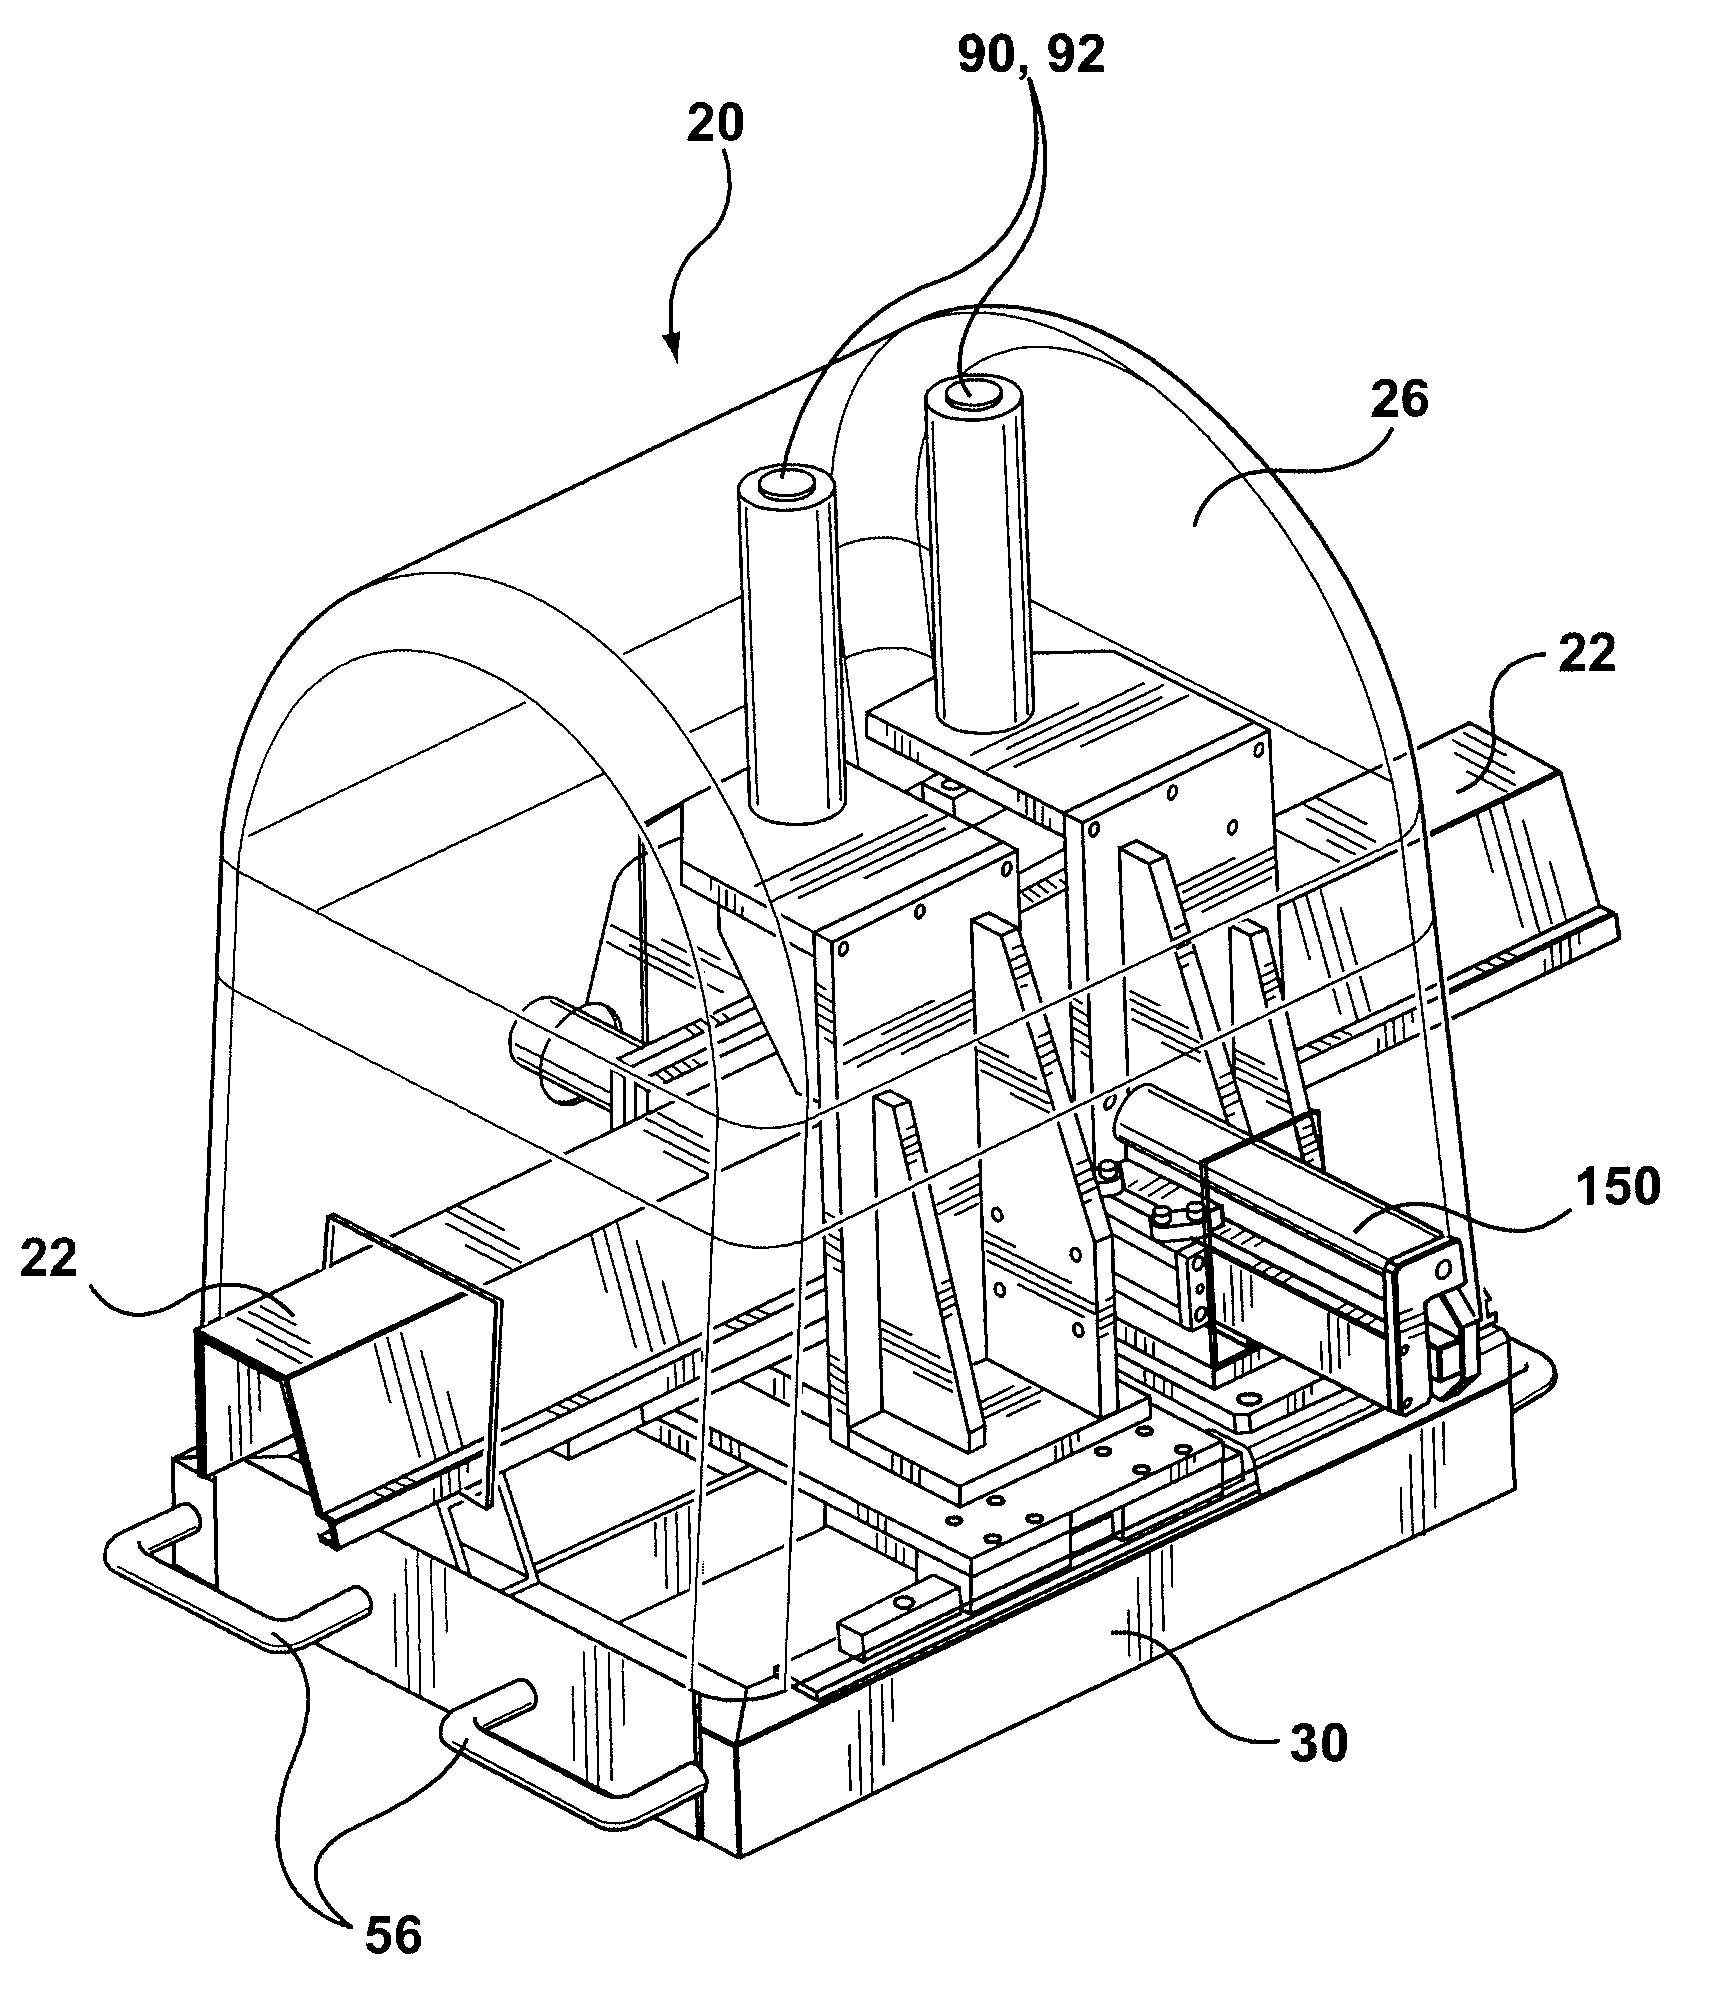 Portable thermo-plastic welding machine and method